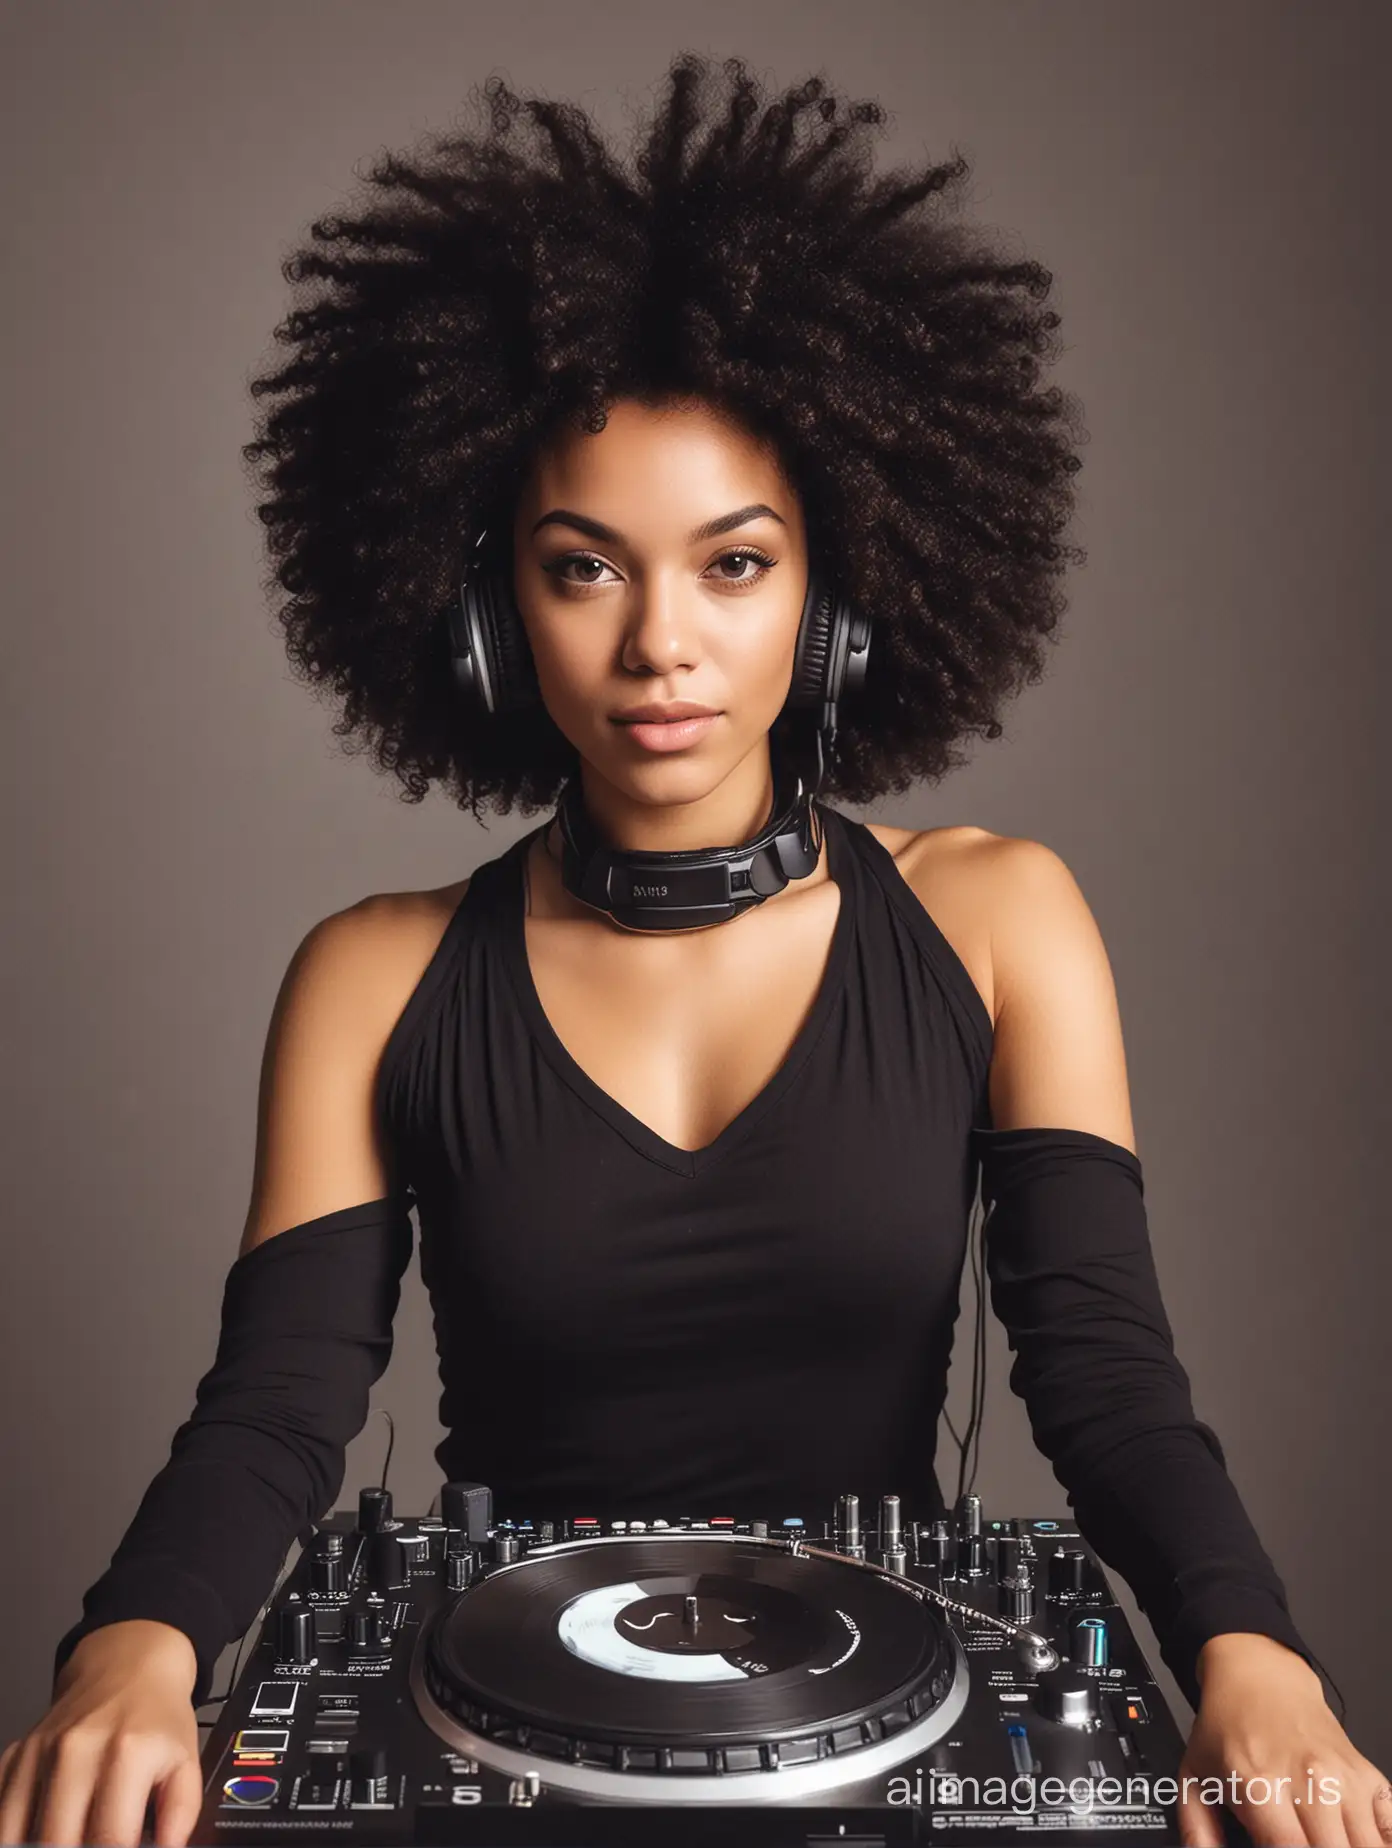 Lightskin female Dj with afro halo a song